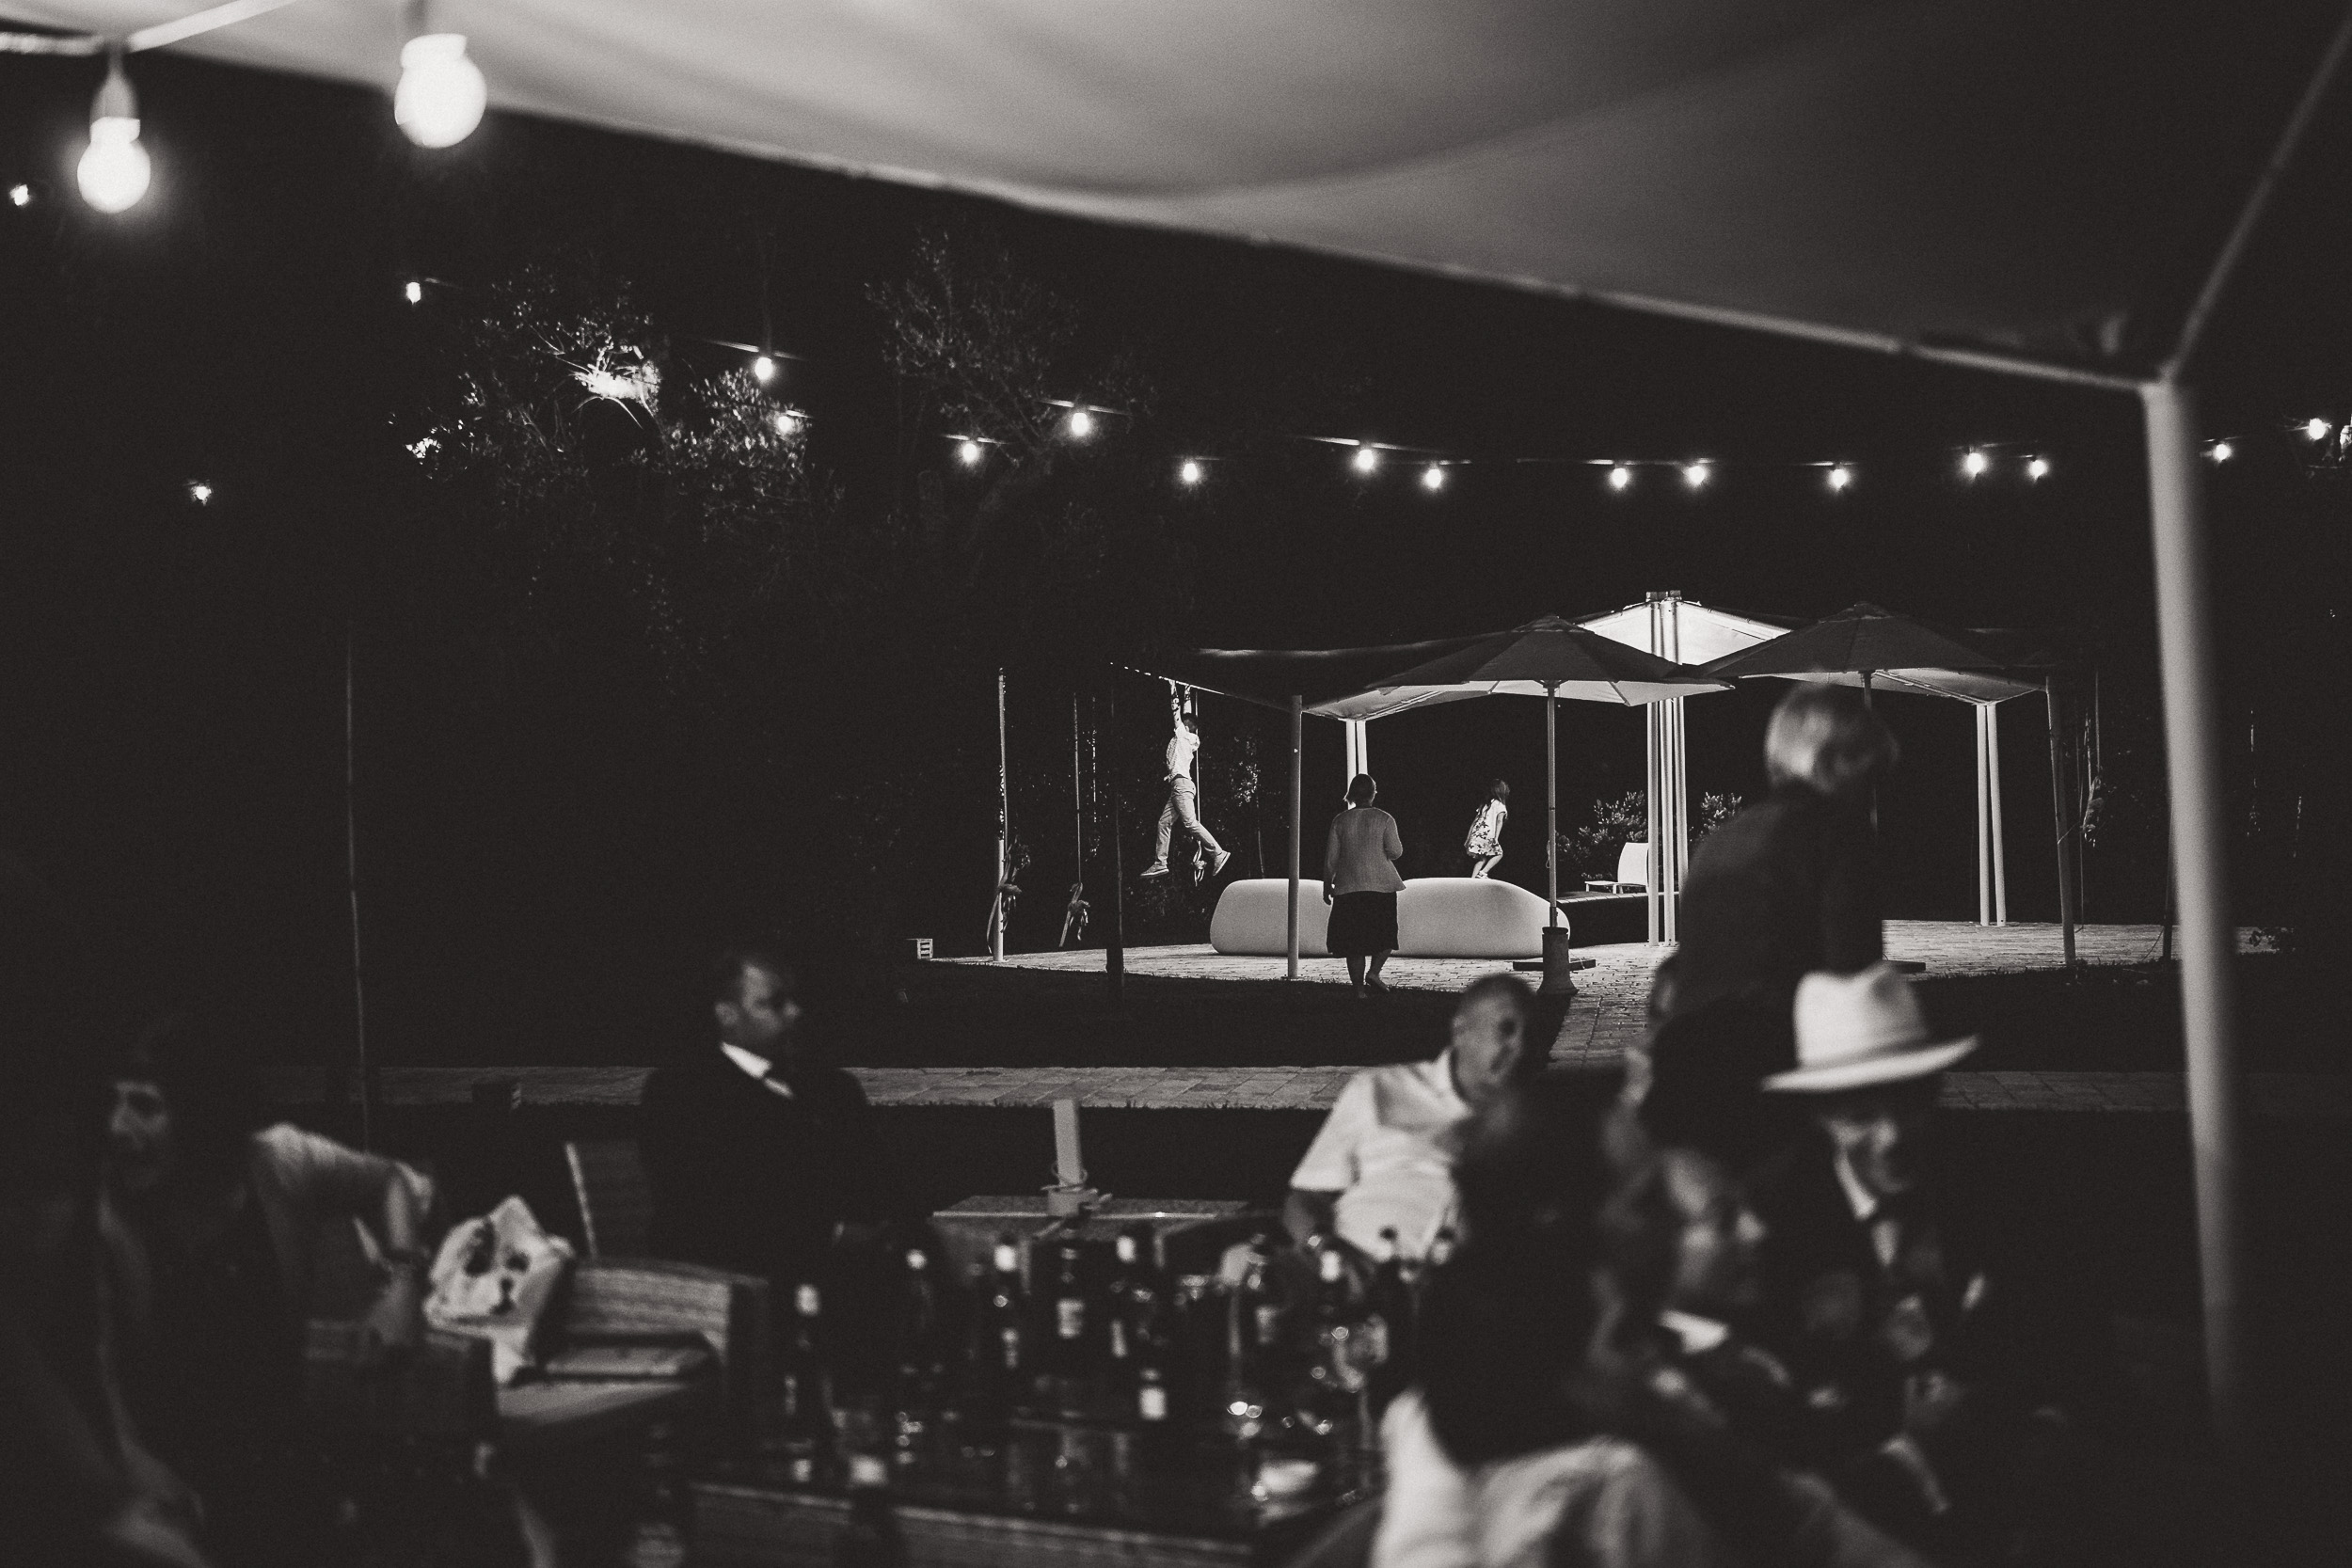 A black and white wedding reception photo at night.